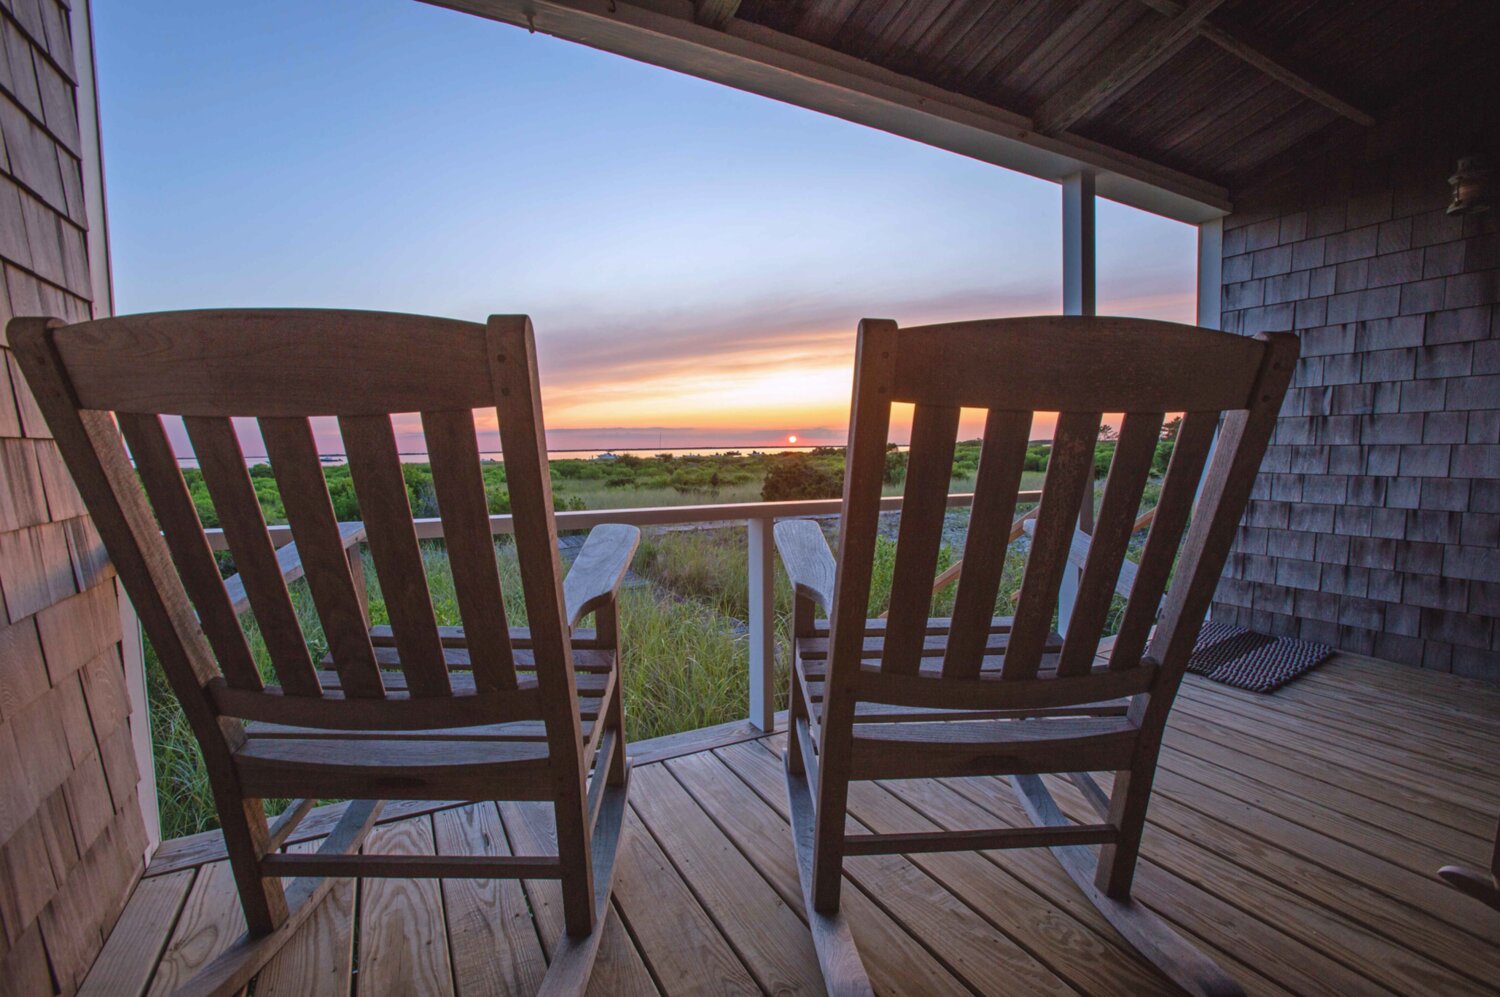 There may not be a finer spot on the island to relax and watch the sun set.